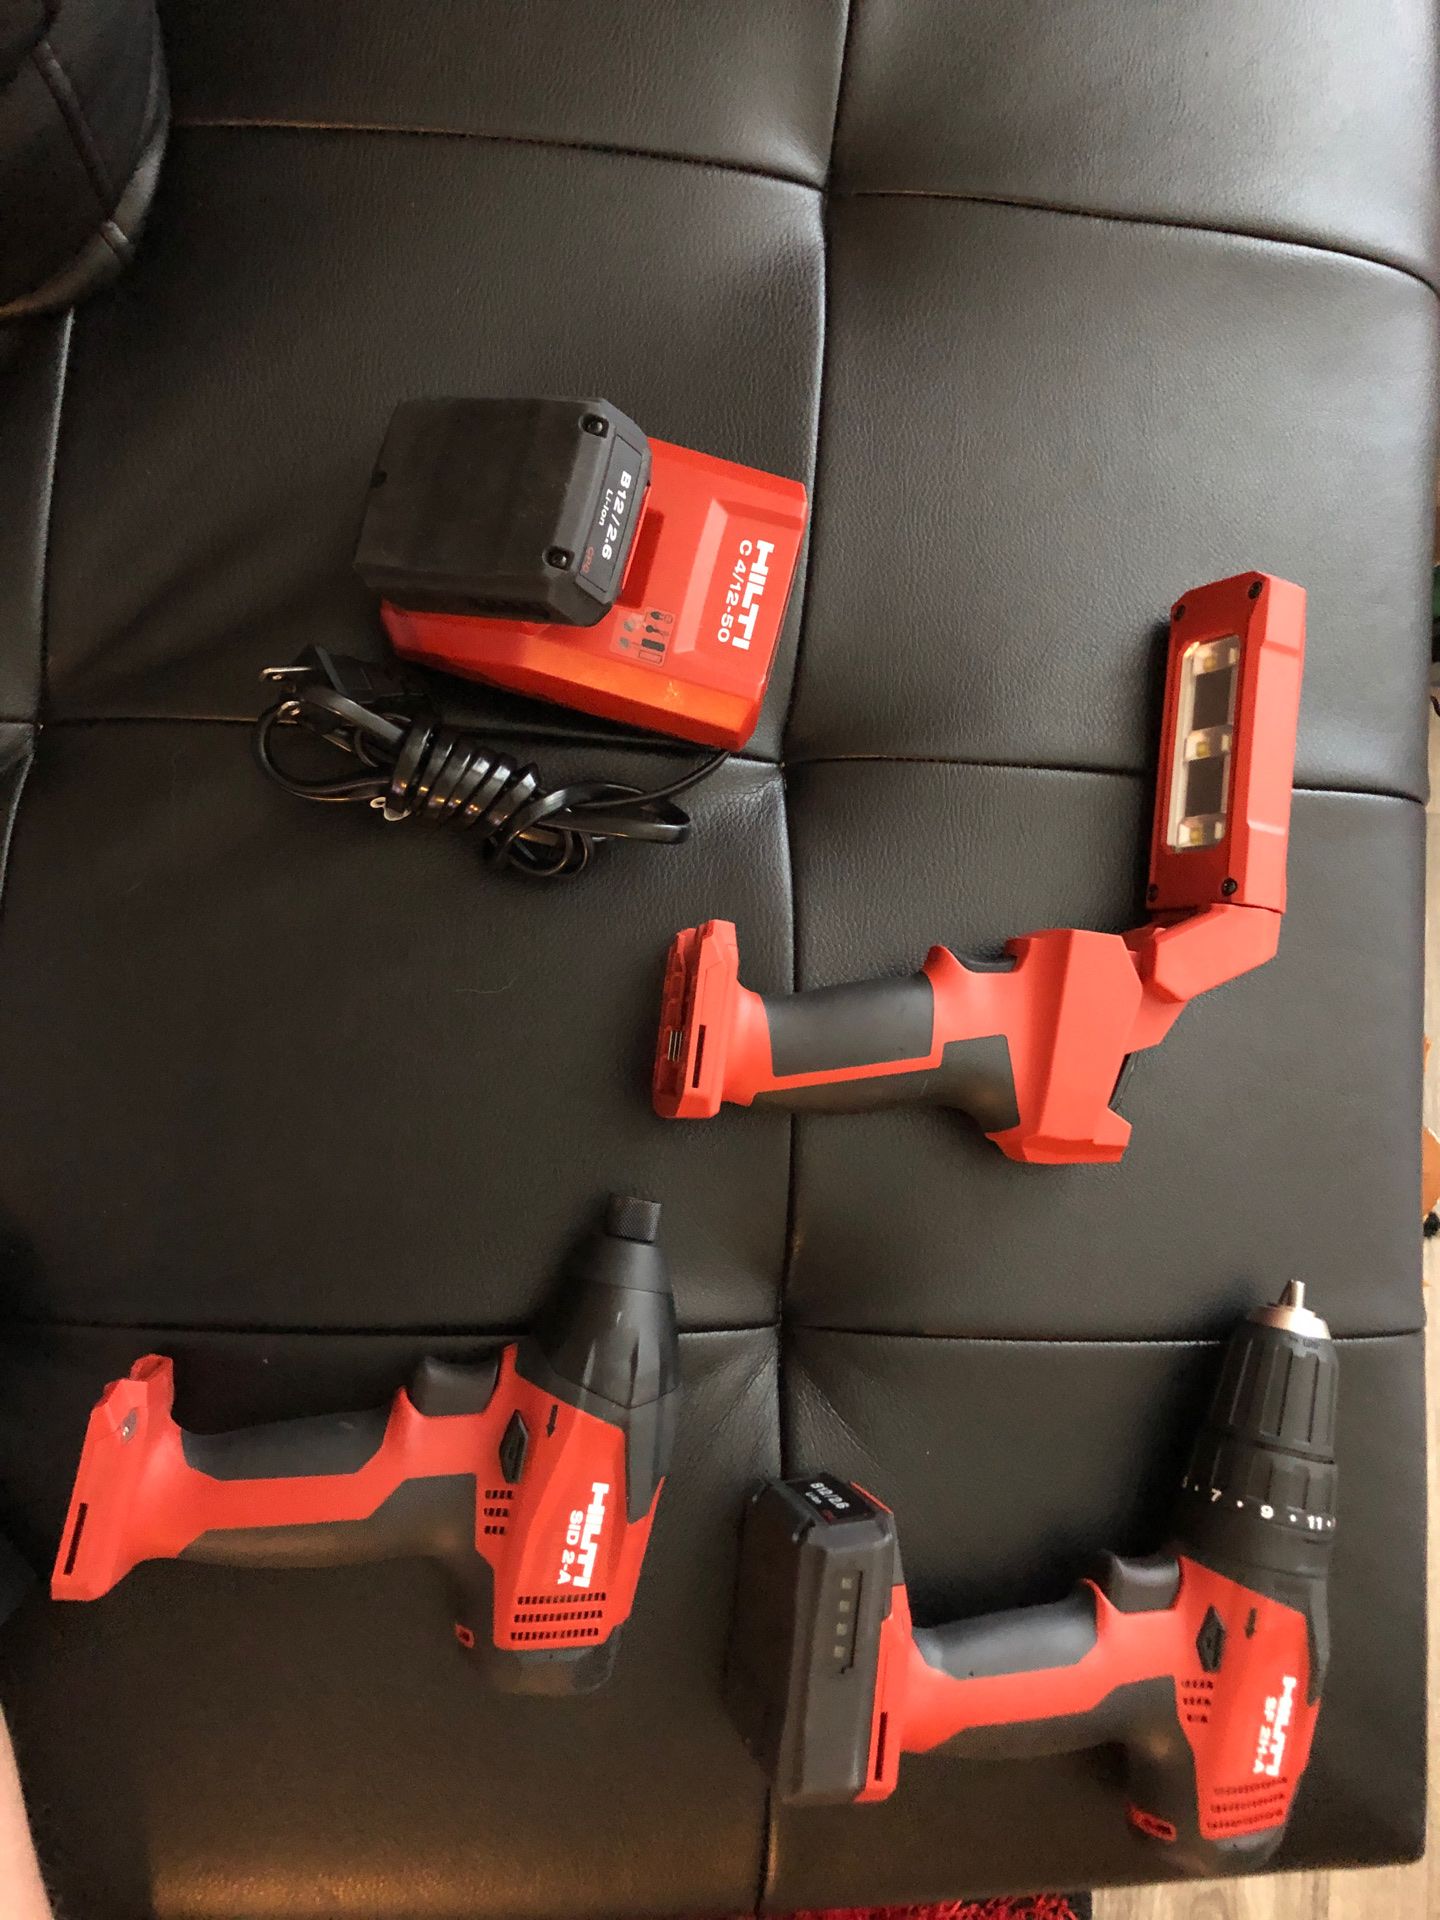 Hilti- 2 drill/light/battery and charger